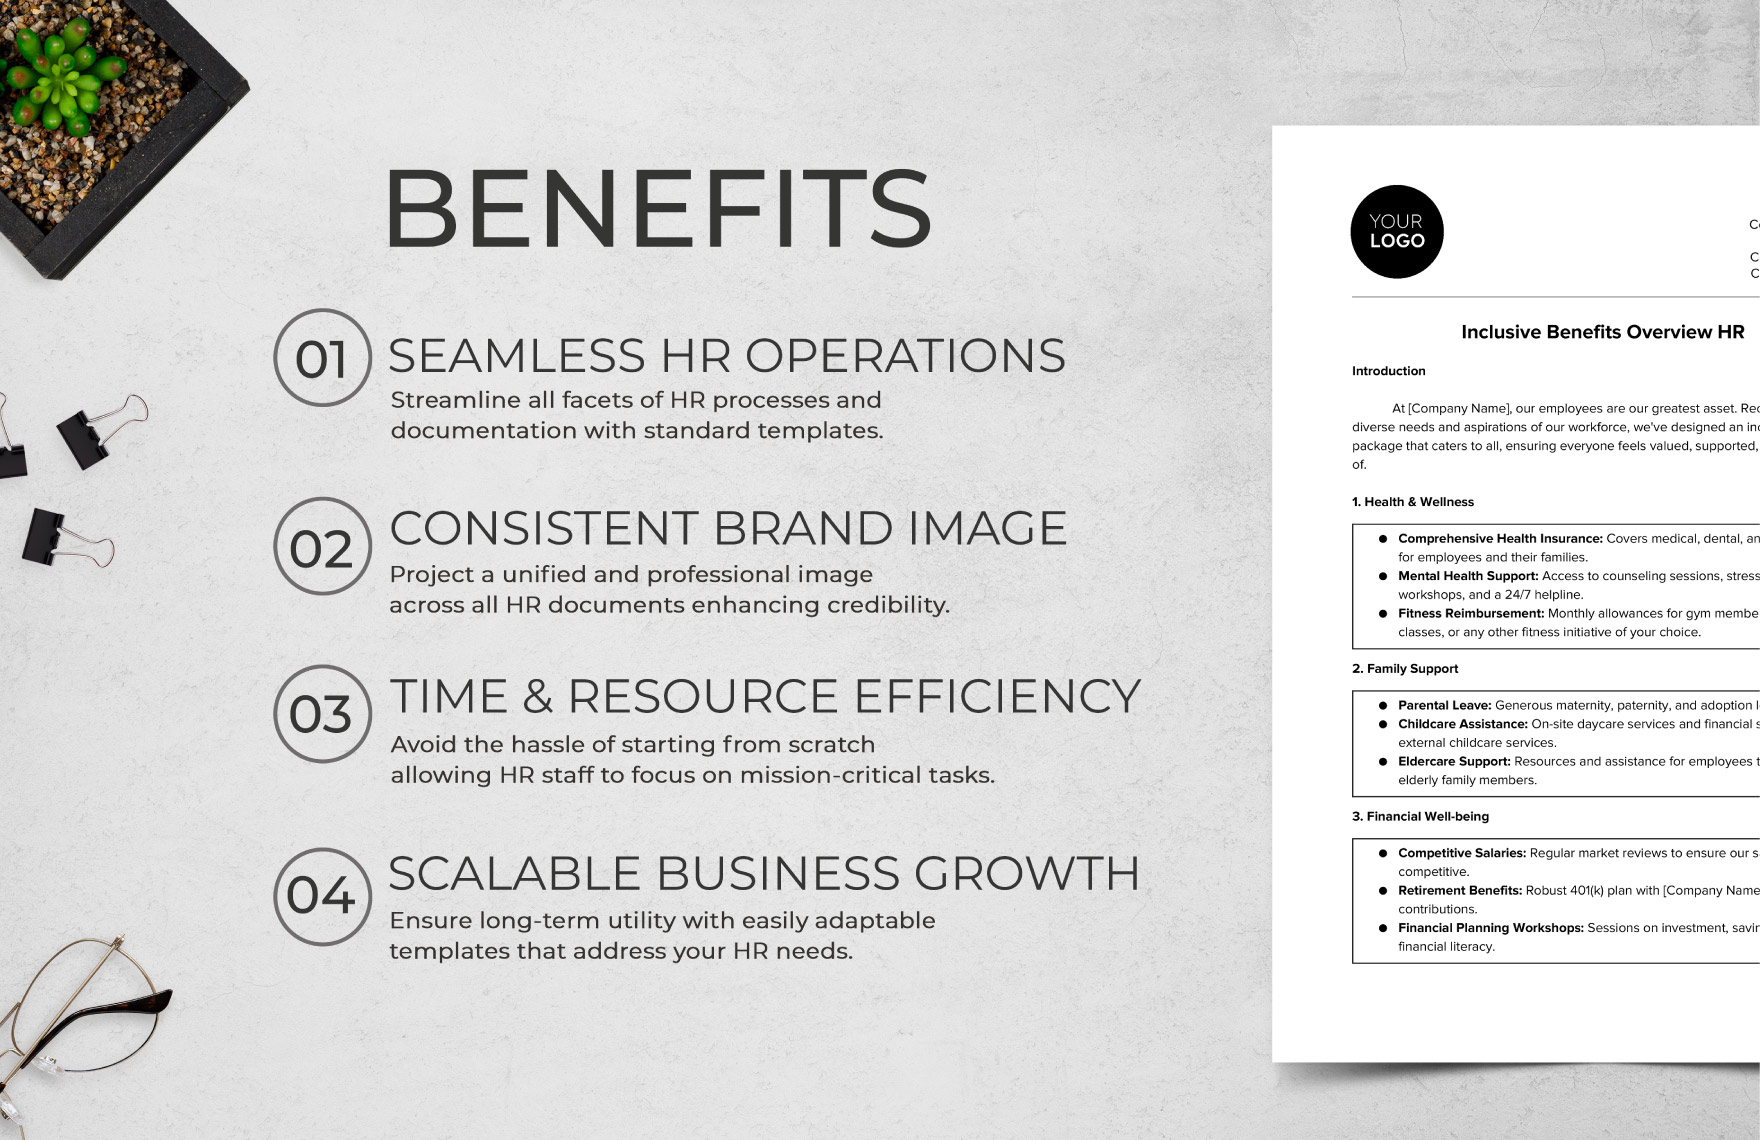 Inclusive Benefits Overview HR Template